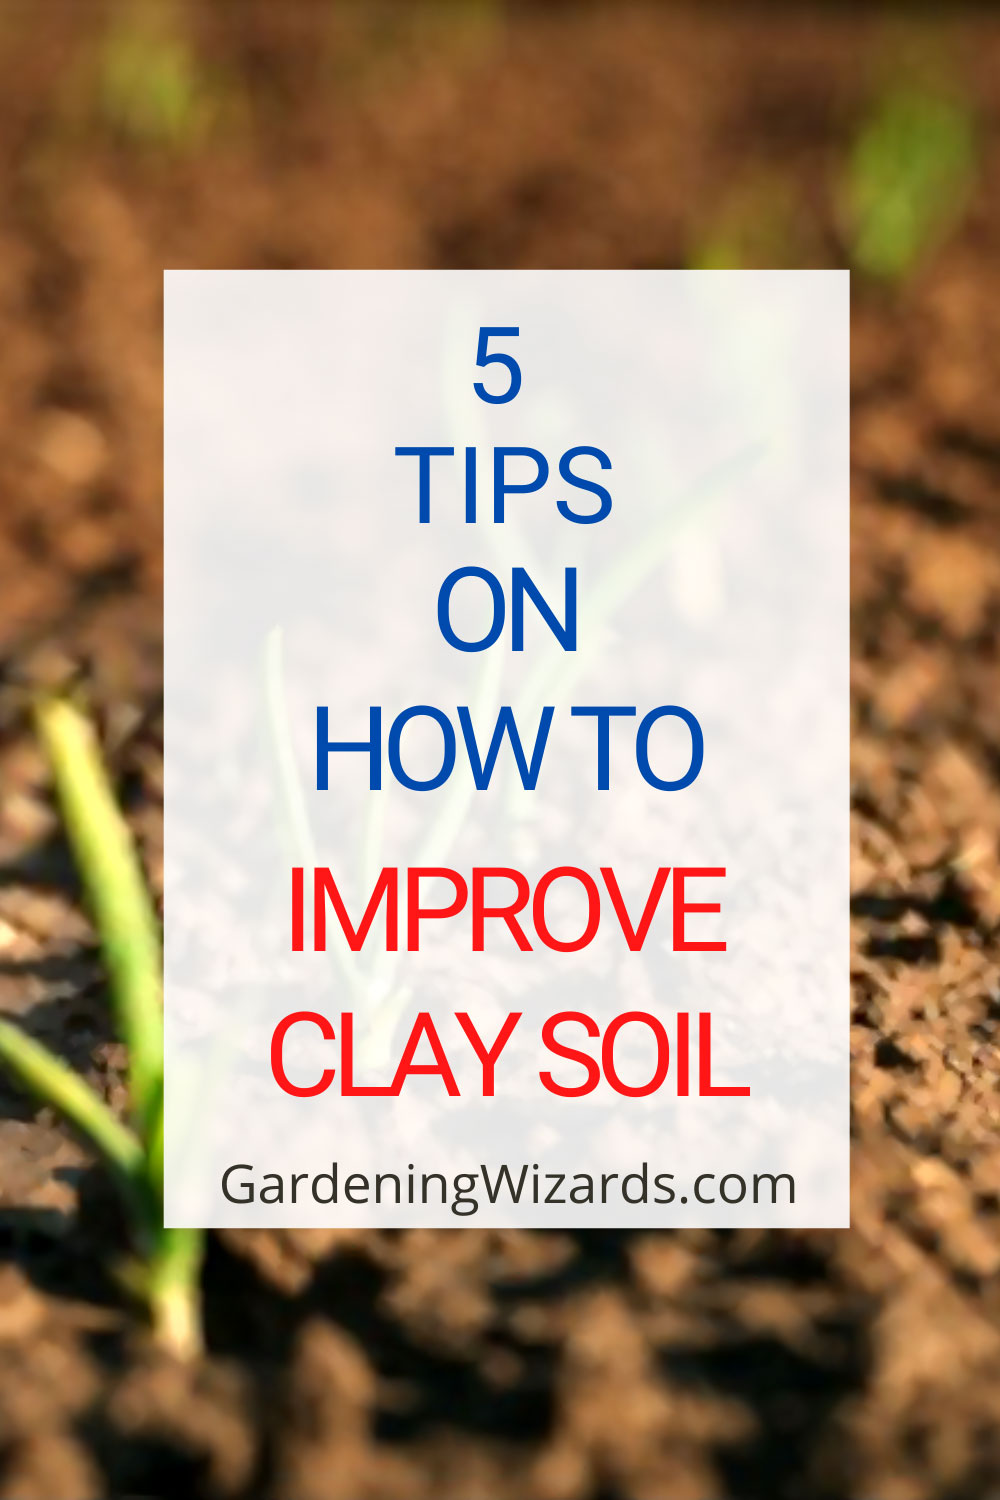 How to improve clay soil